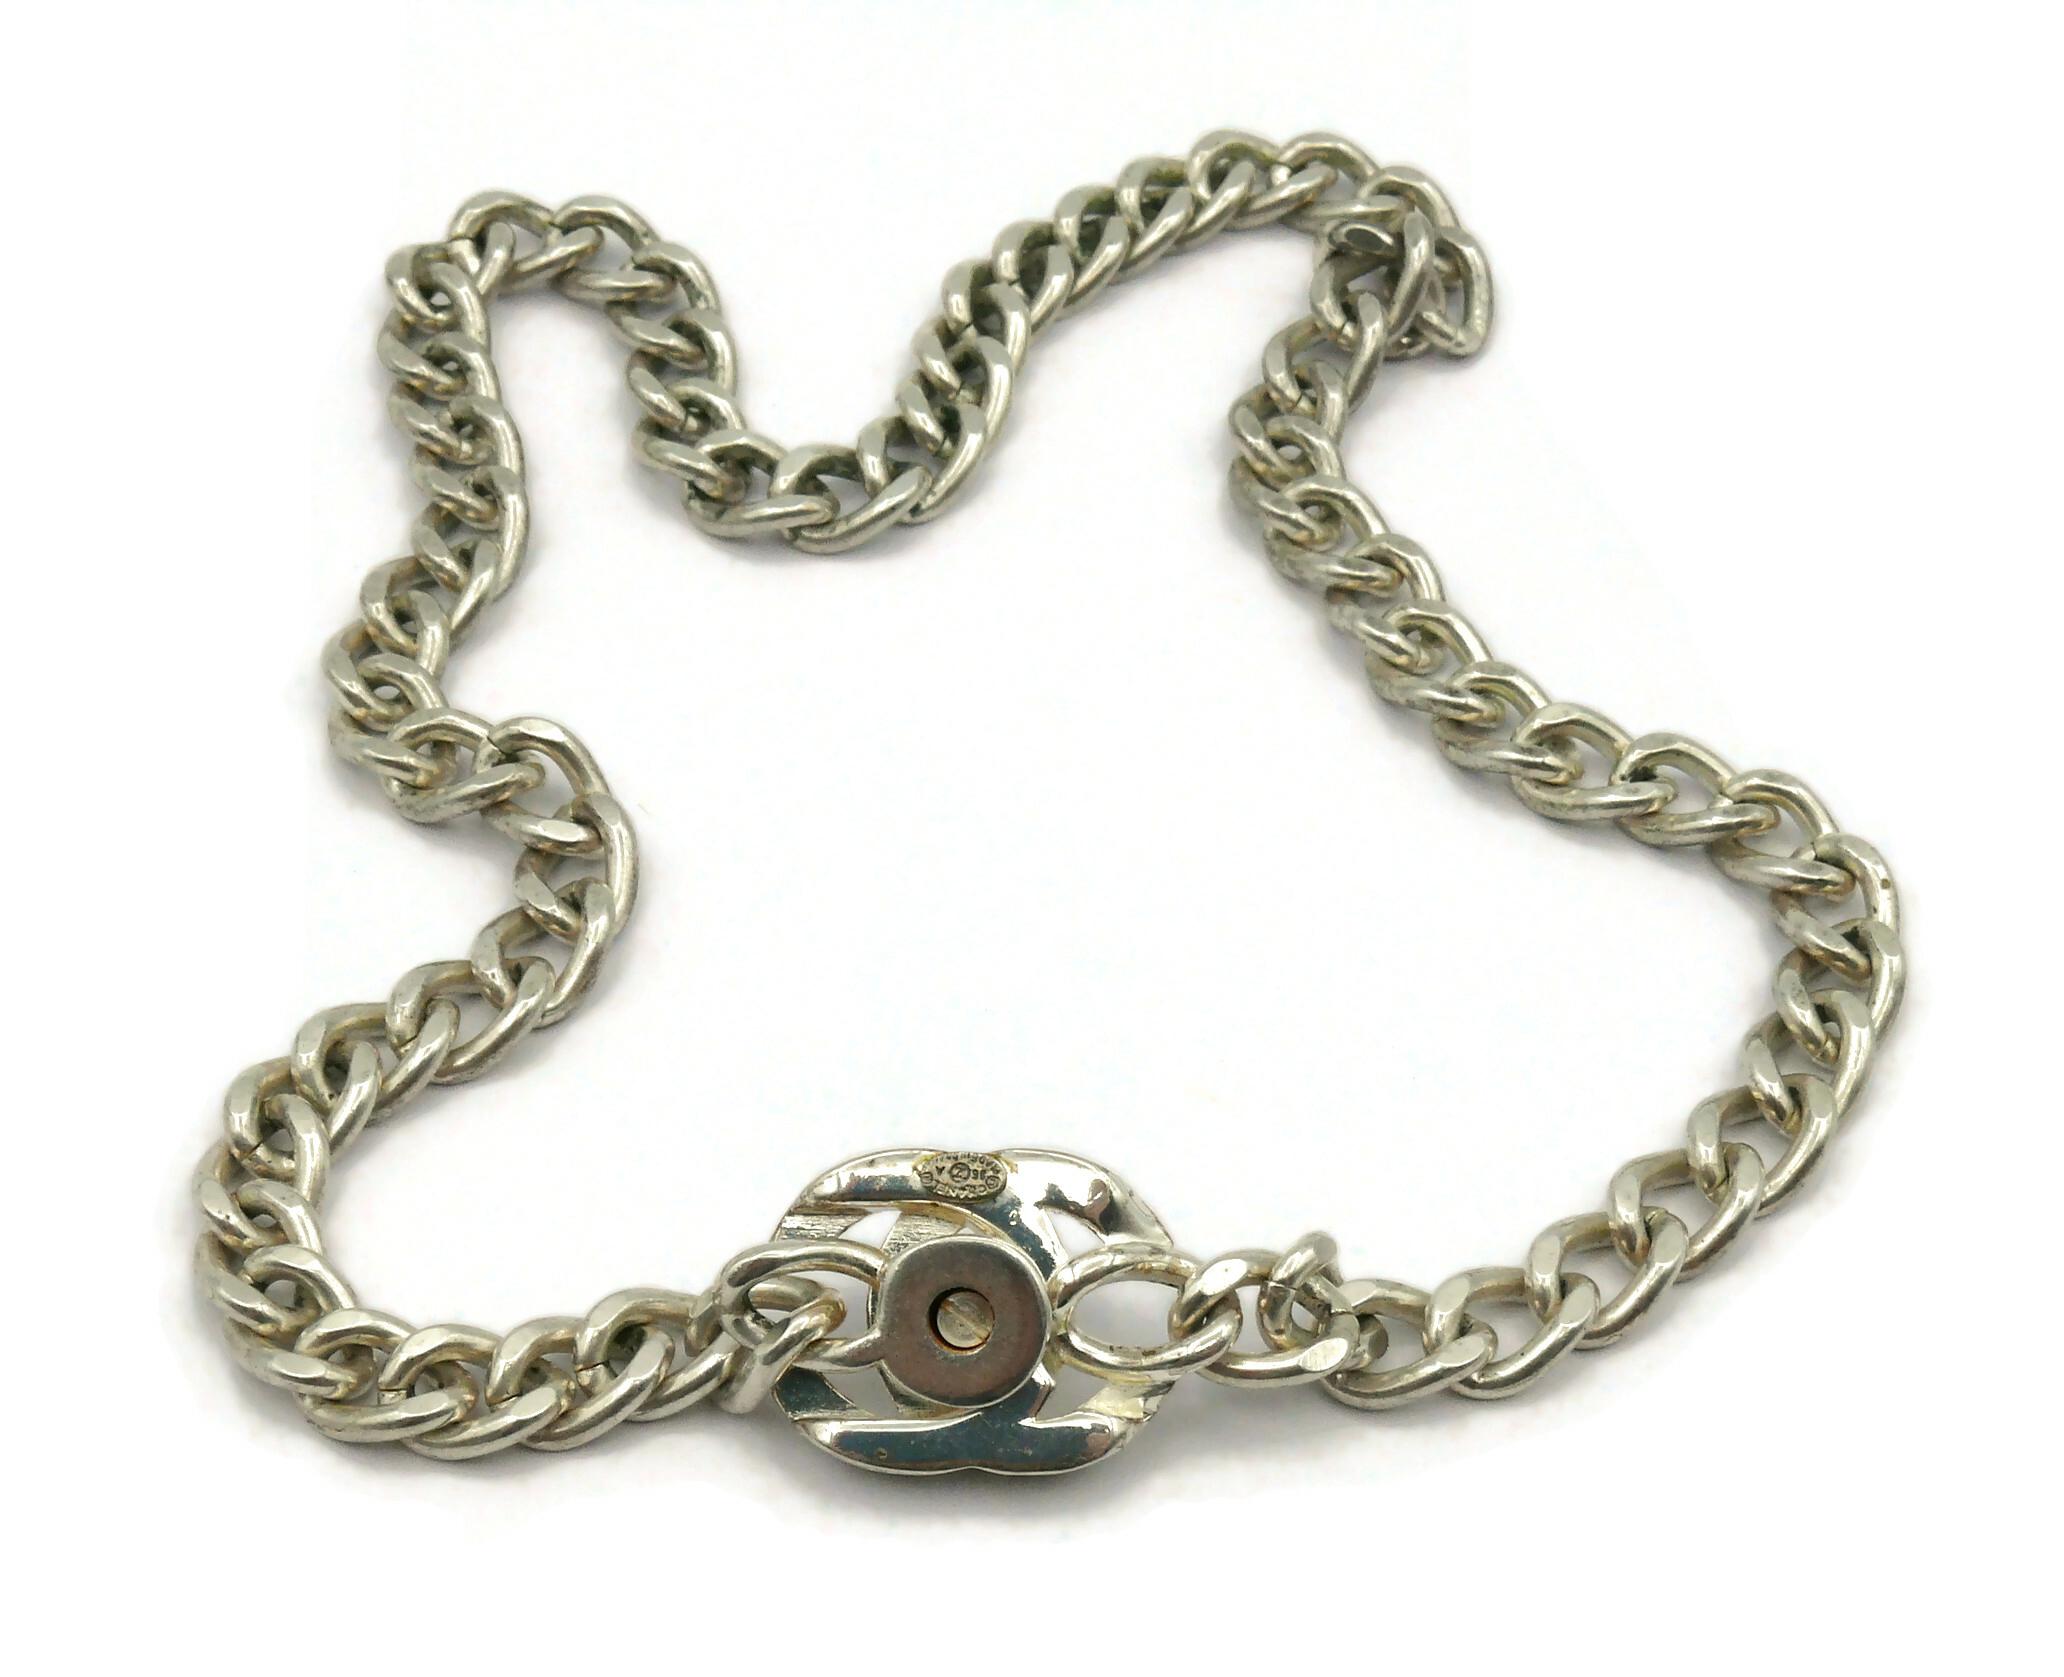 CHANEL by KARL LAGERFELD Vintage 1996 Silver Tone Jewelled Turn-Lock Necklace For Sale 8